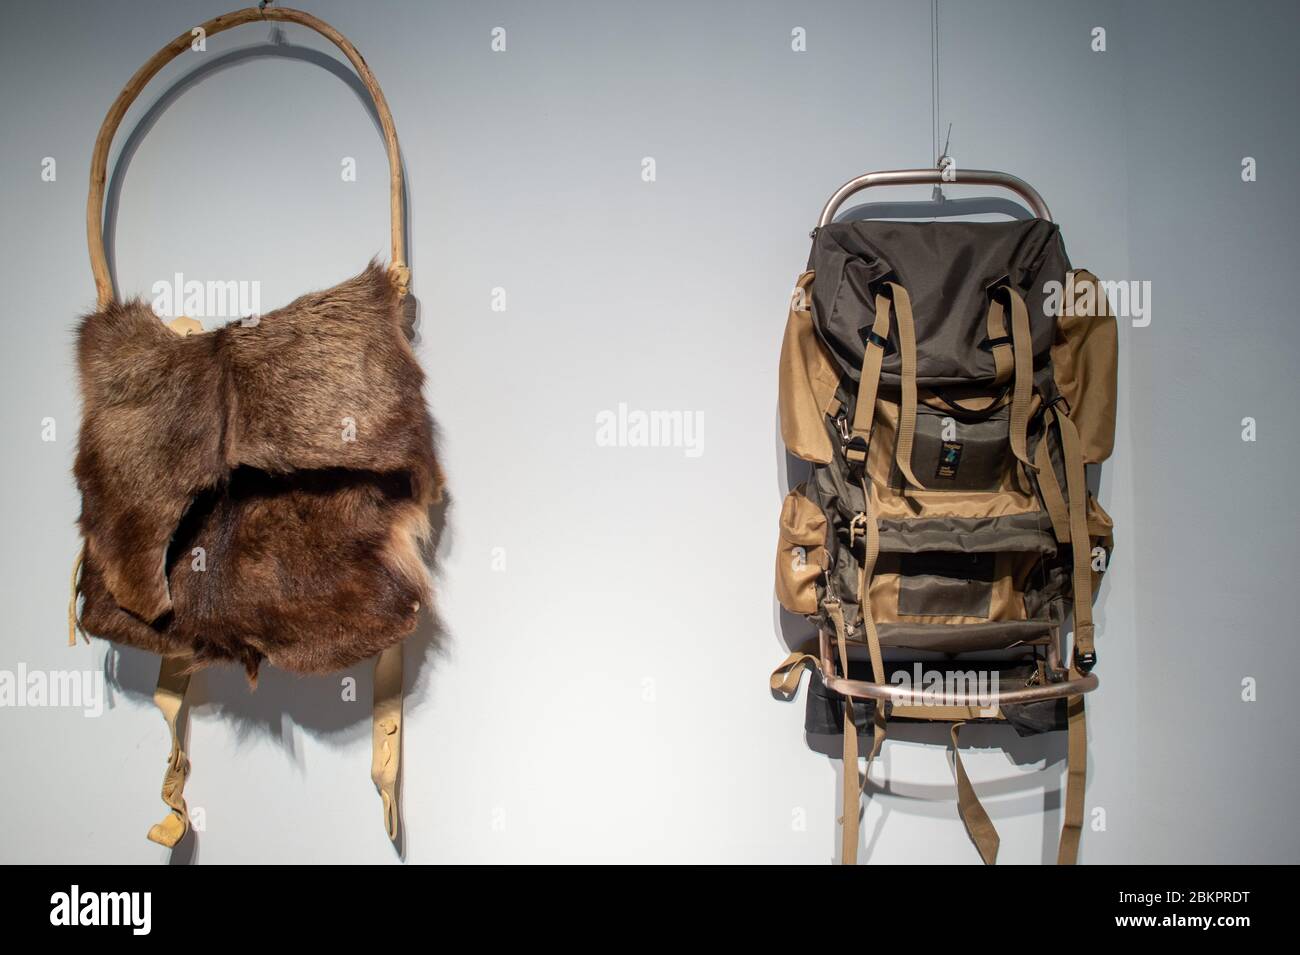 05 May 2020, Saxony-Anhalt, Magdeburg: The replica (l.) of the rucksack of  the Stone Age man "Ötzi", who was discovered in the Ötztal Alps in 1991,  hangs in the Museum of Natural